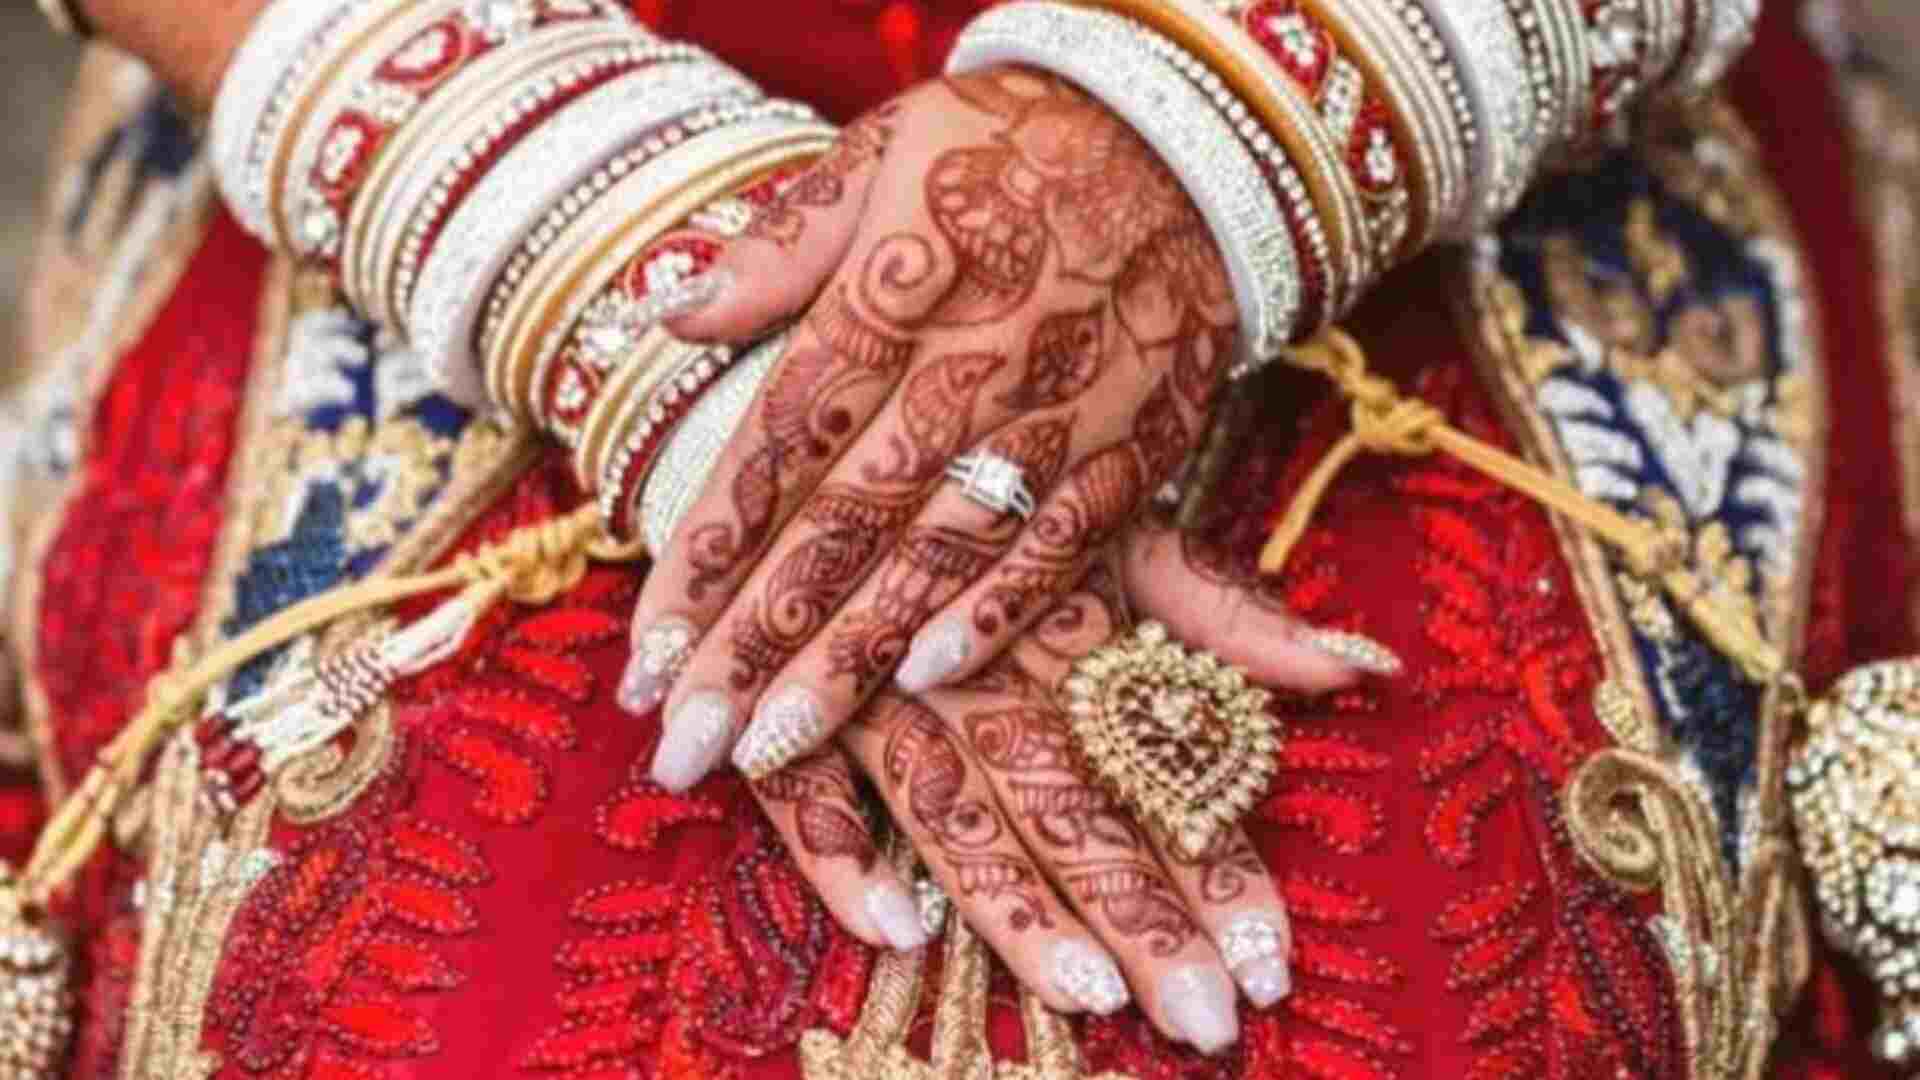 UP Man Throws Daughter-In-Law 48 Hours After Wedding: Know The Shocking Reason